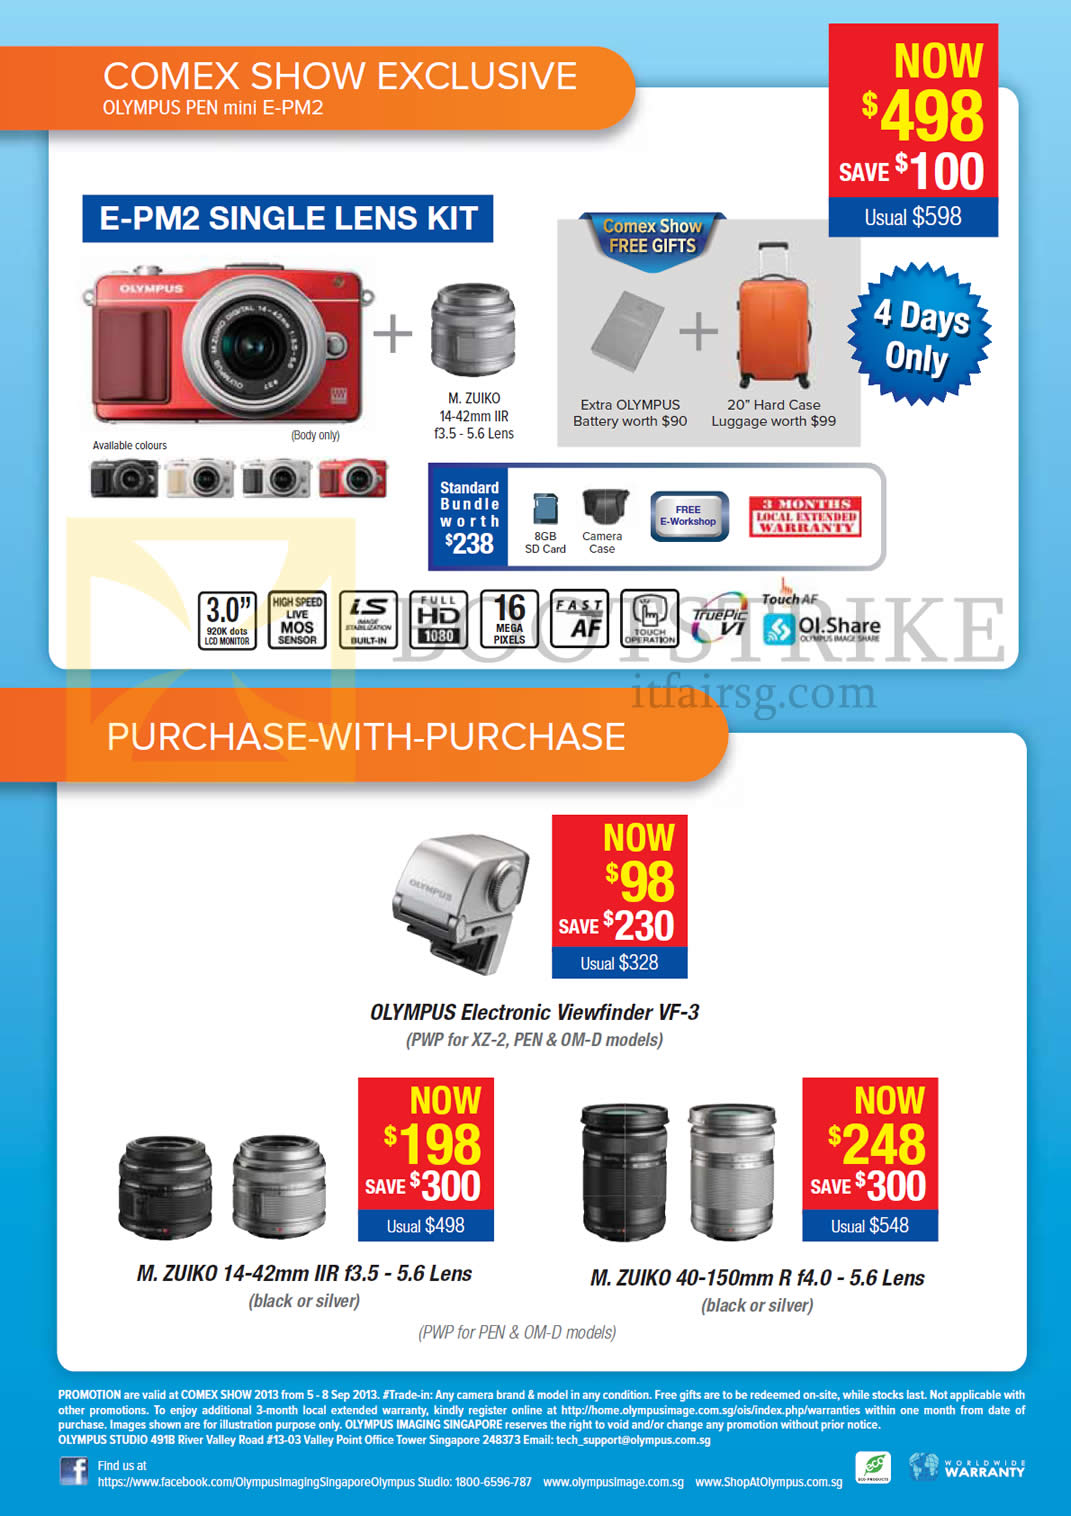 COMEX 2013 price list image brochure of Courts Olympus Digital Cameras E-PM2, Purchase With Purchase